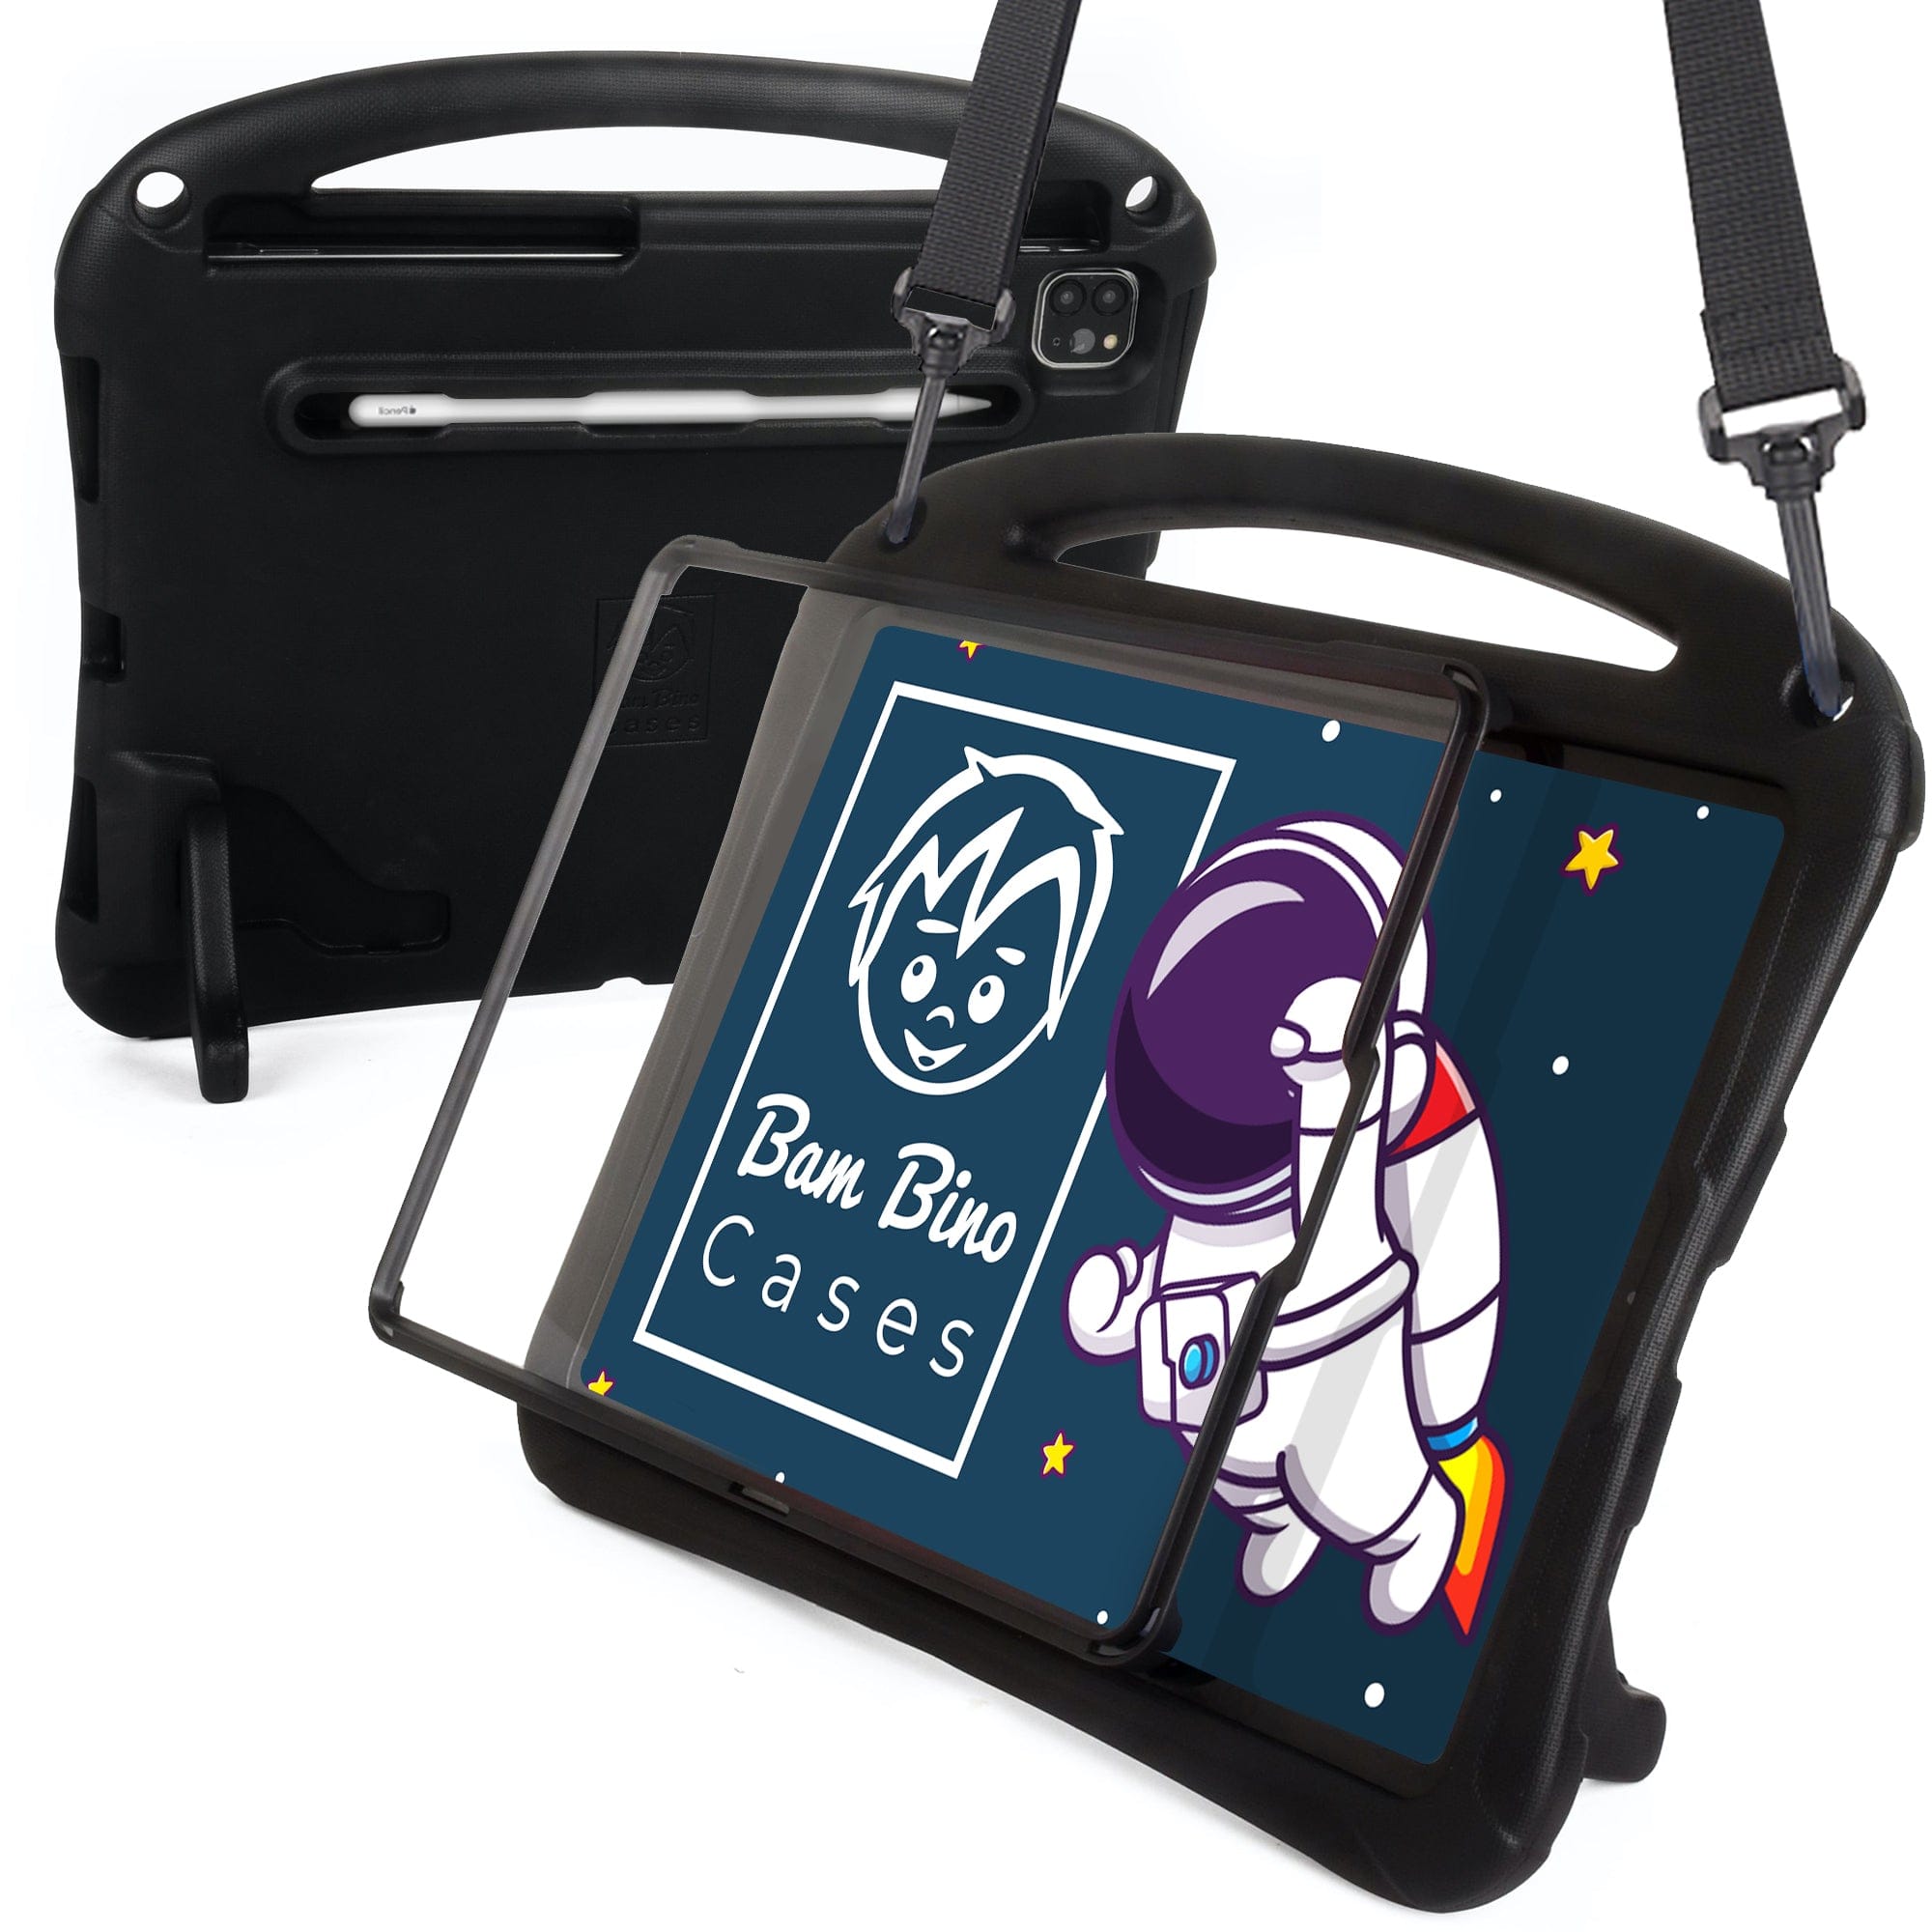 Bam Bino Space Suit Super Rugged Kids Case with Screen Guard for Samsung Galaxy Tab S5e 10.5